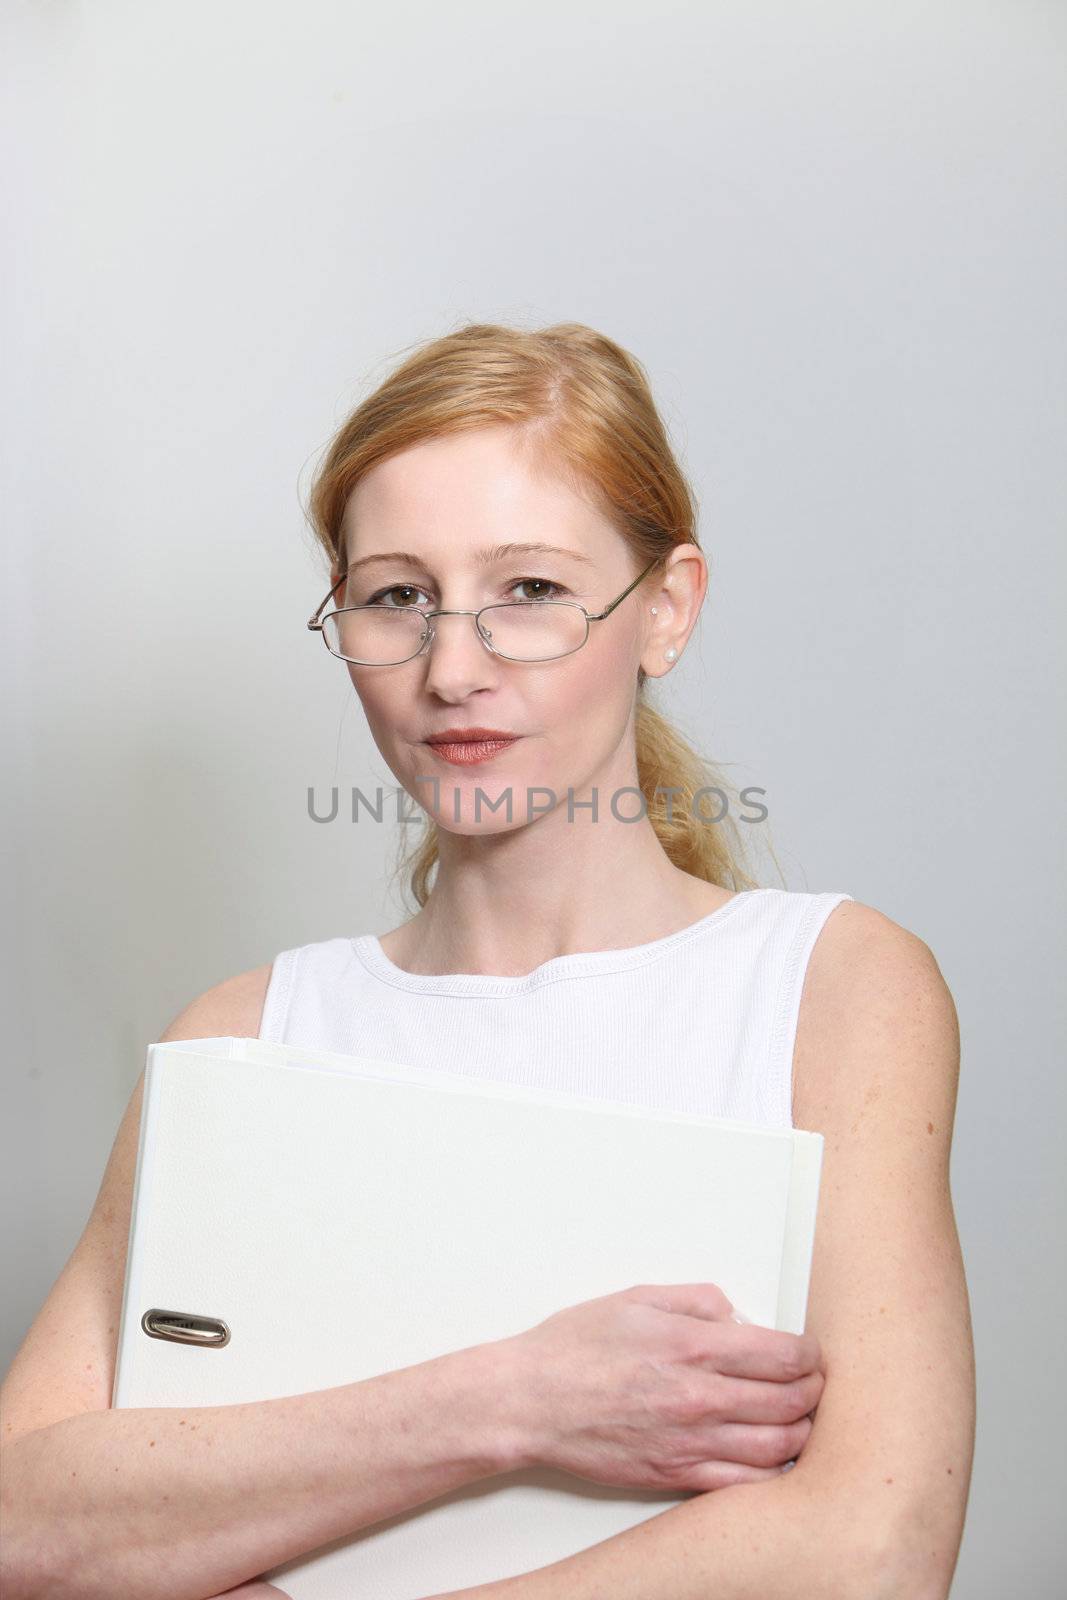 Determined young woman in the office. She holds a file folder